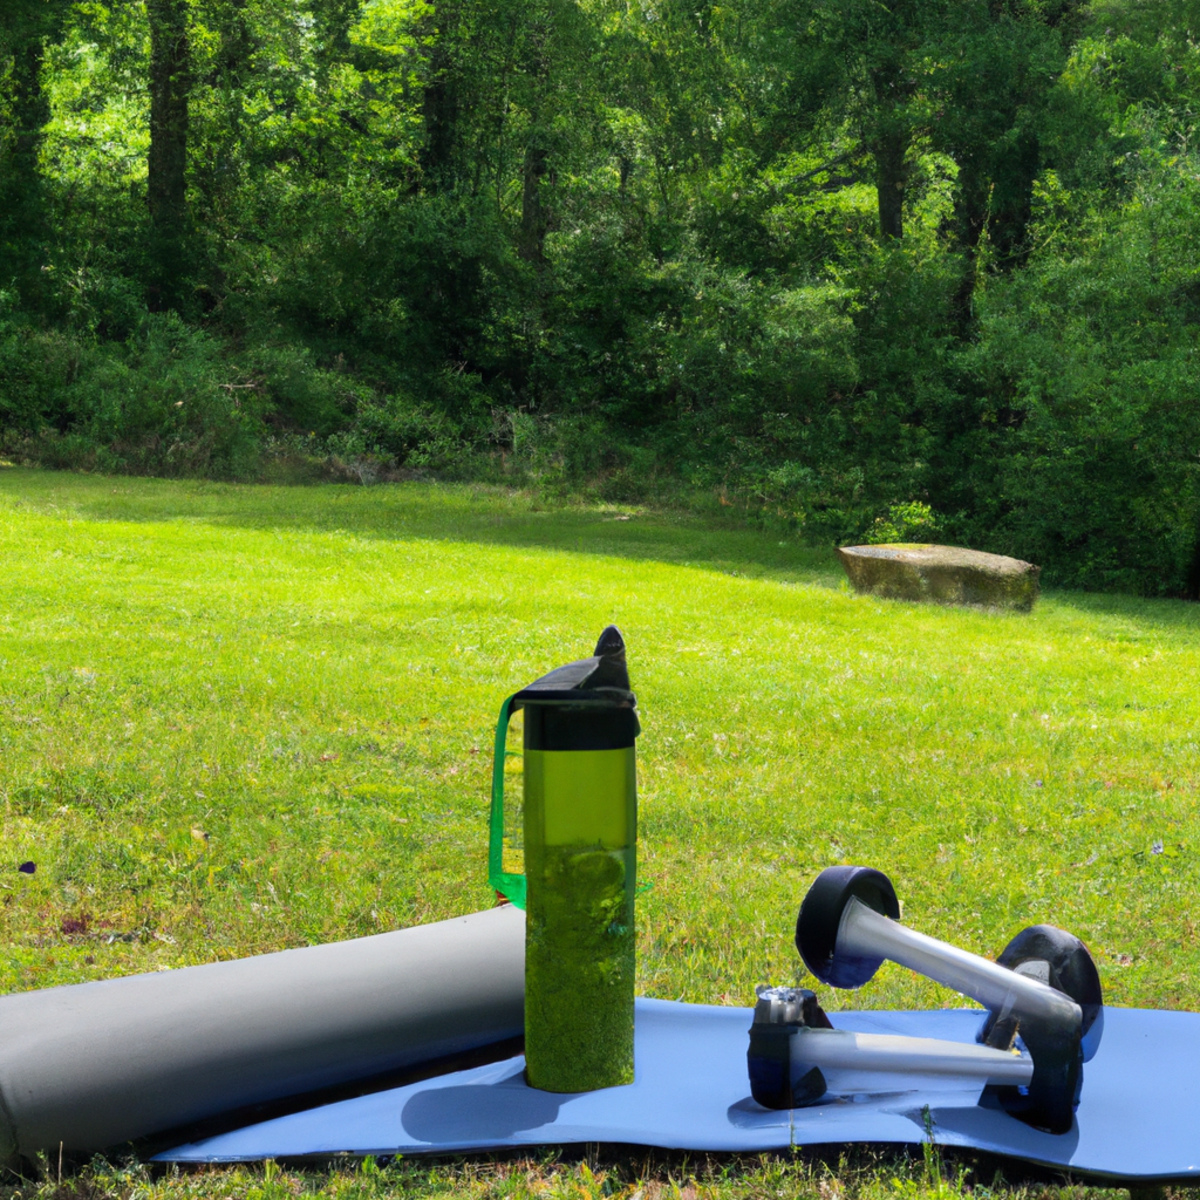 The photo captures a serene outdoor setting with a lush green landscape in the background. In the foreground, there are various fitness objects scattered around, including a yoga mat, resistance bands, and a set of dumbbells. The objects are strategically placed to showcase the versatility of outdoor fitness and how it can be adapted to suit different workout routines. The lighting is soft and natural, creating a calming and inviting atmosphere that encourages viewers to step outside and switch up their fitness routine.